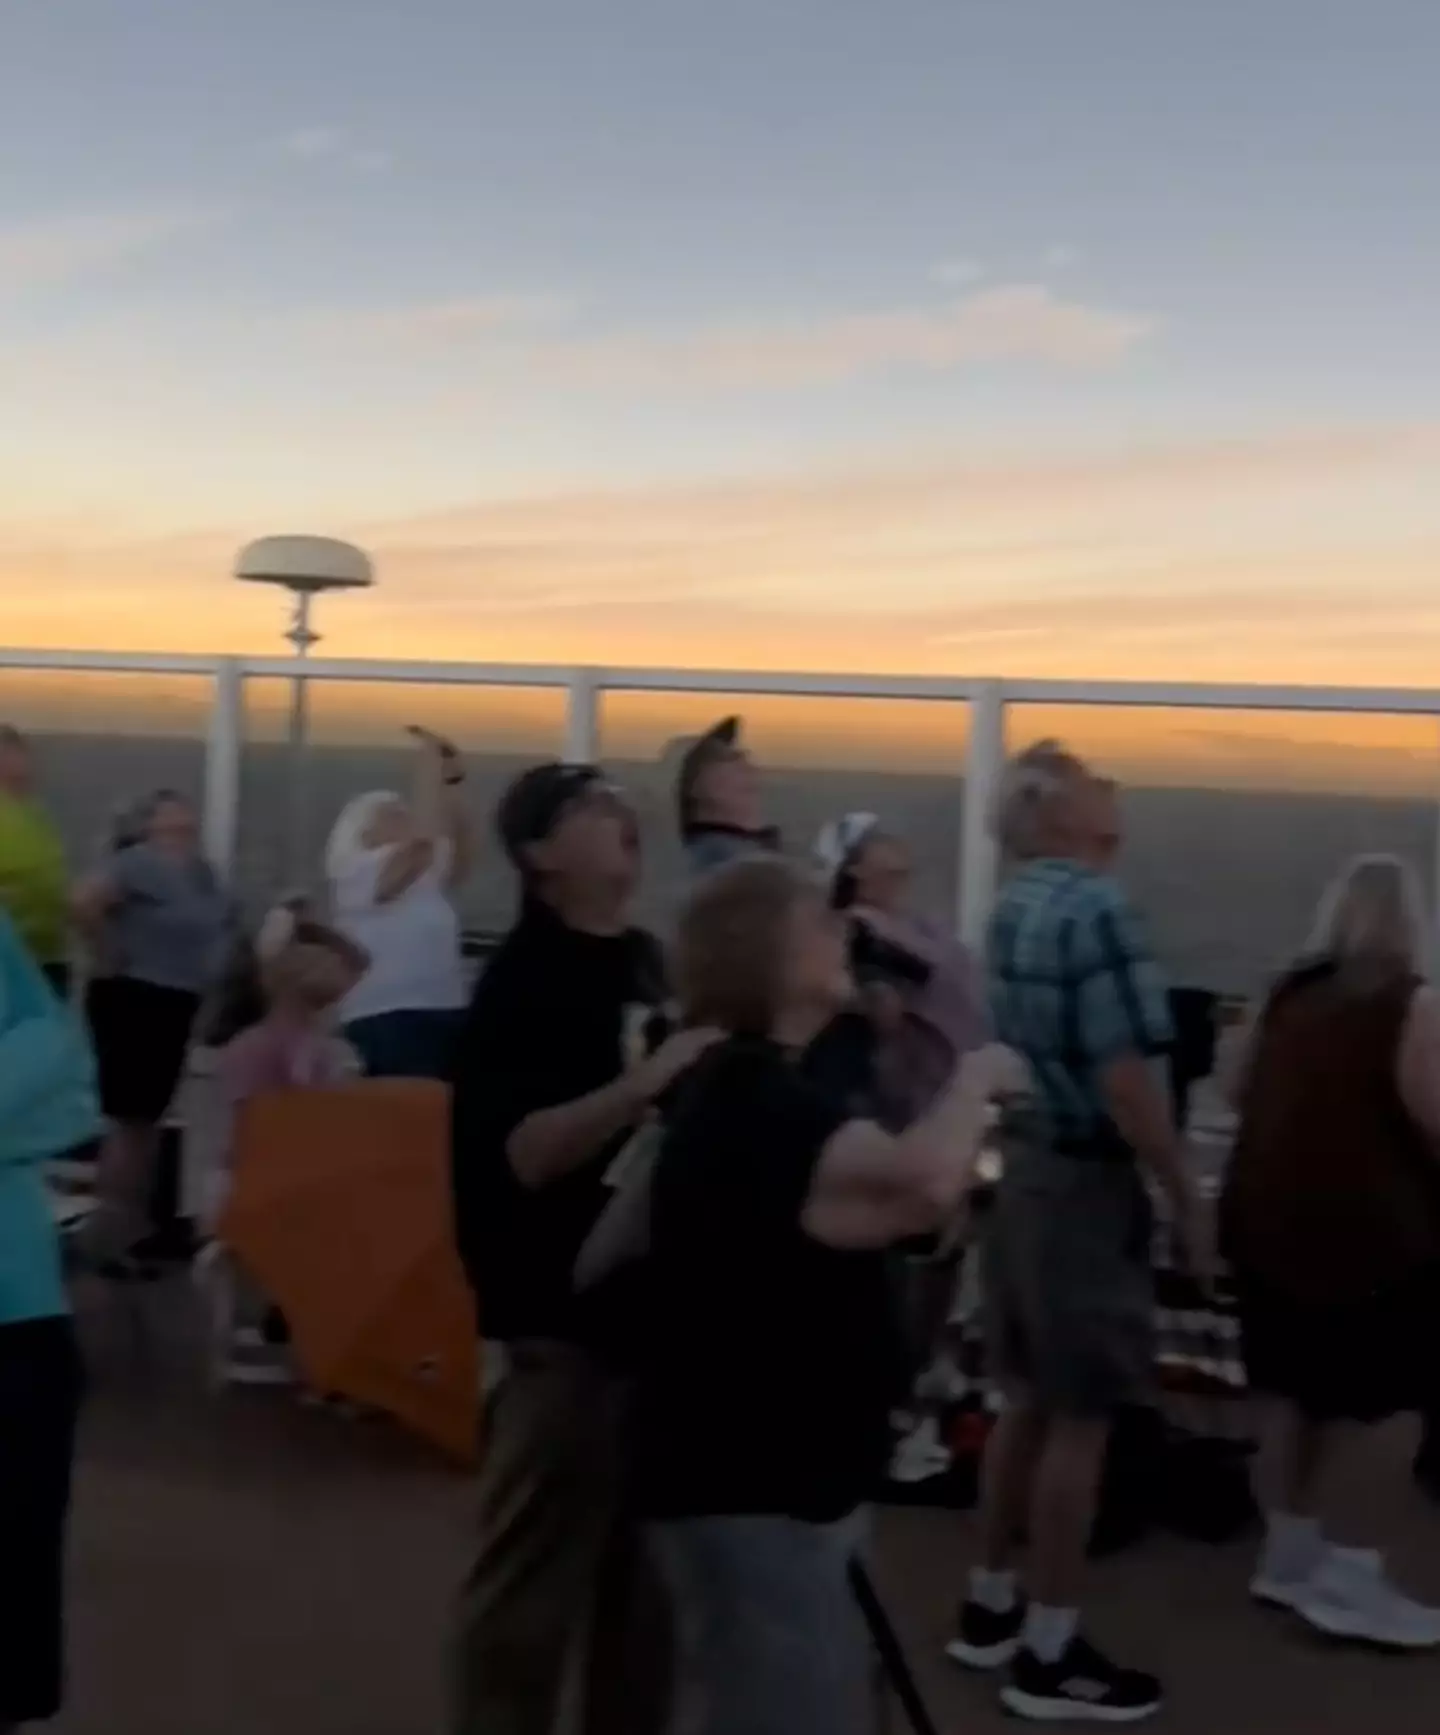 The top deck as the totality event happened (TikTok / @josh1rivera)